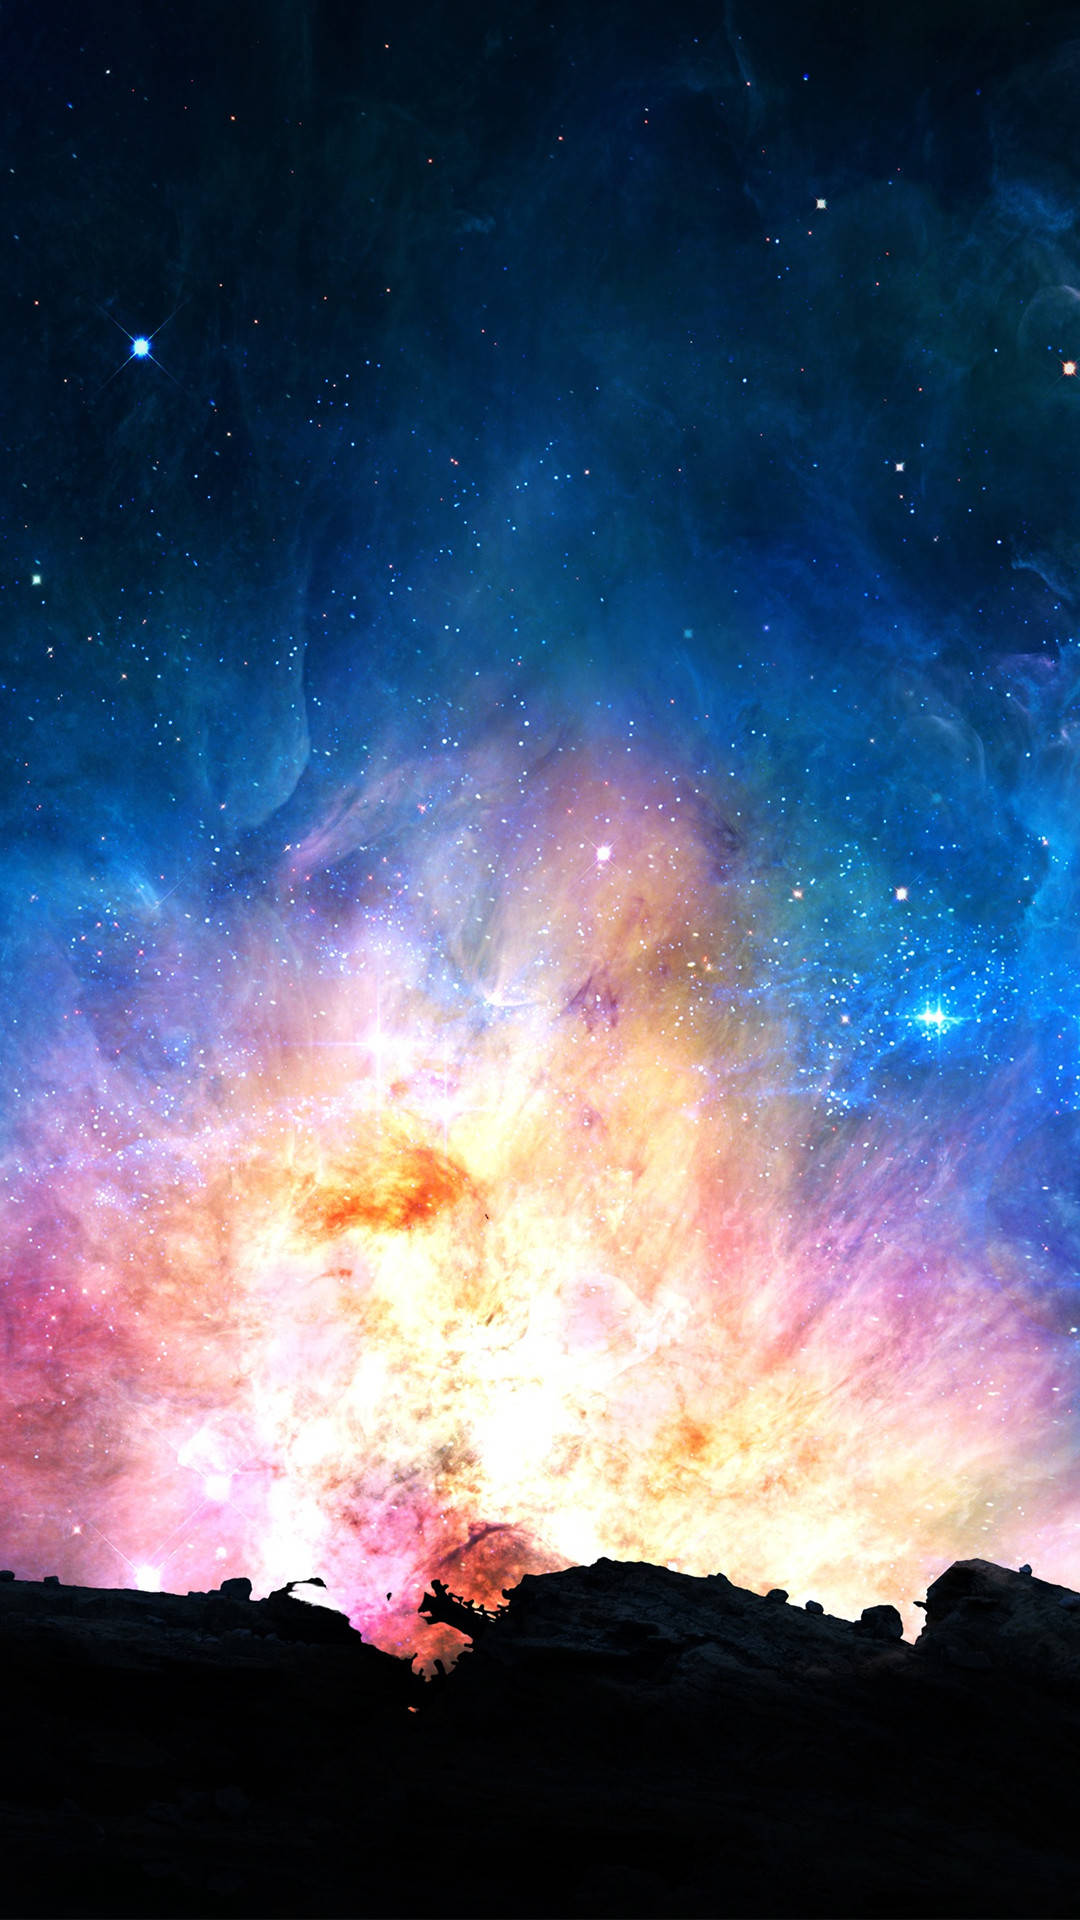 A Colorful Space Background With Stars And Clouds Wallpaper